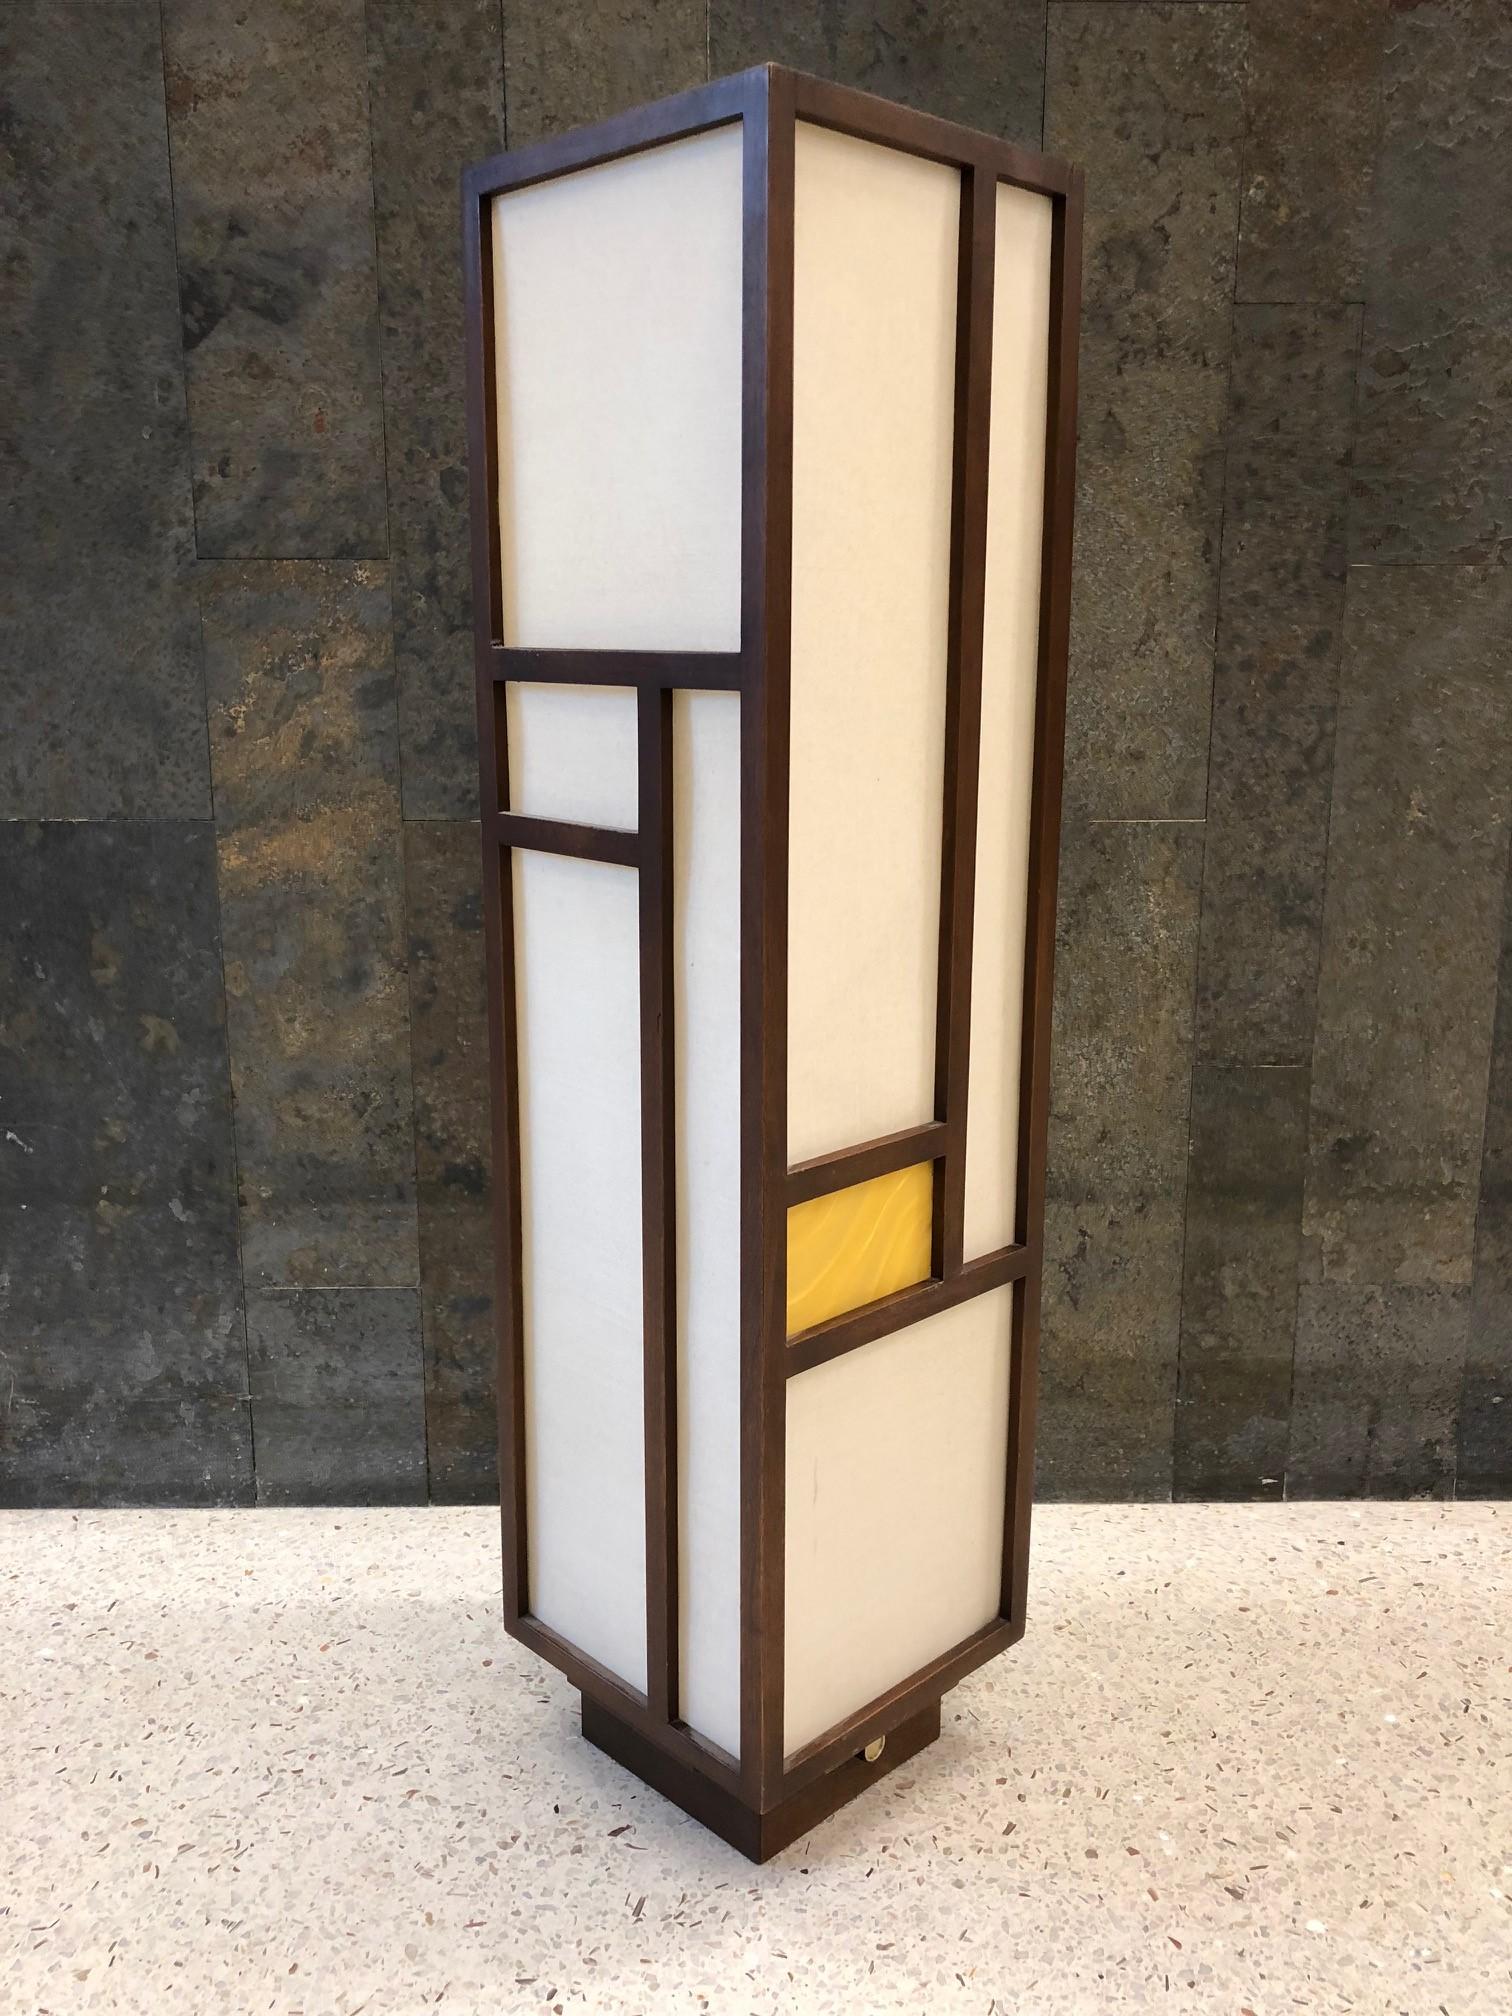 Mid-Century Modern lamp. The lamp has a solid walnut frame with linen and two gold acrylic panels. Beautiful when lit. Nakashima style. Has a dimmer switch.